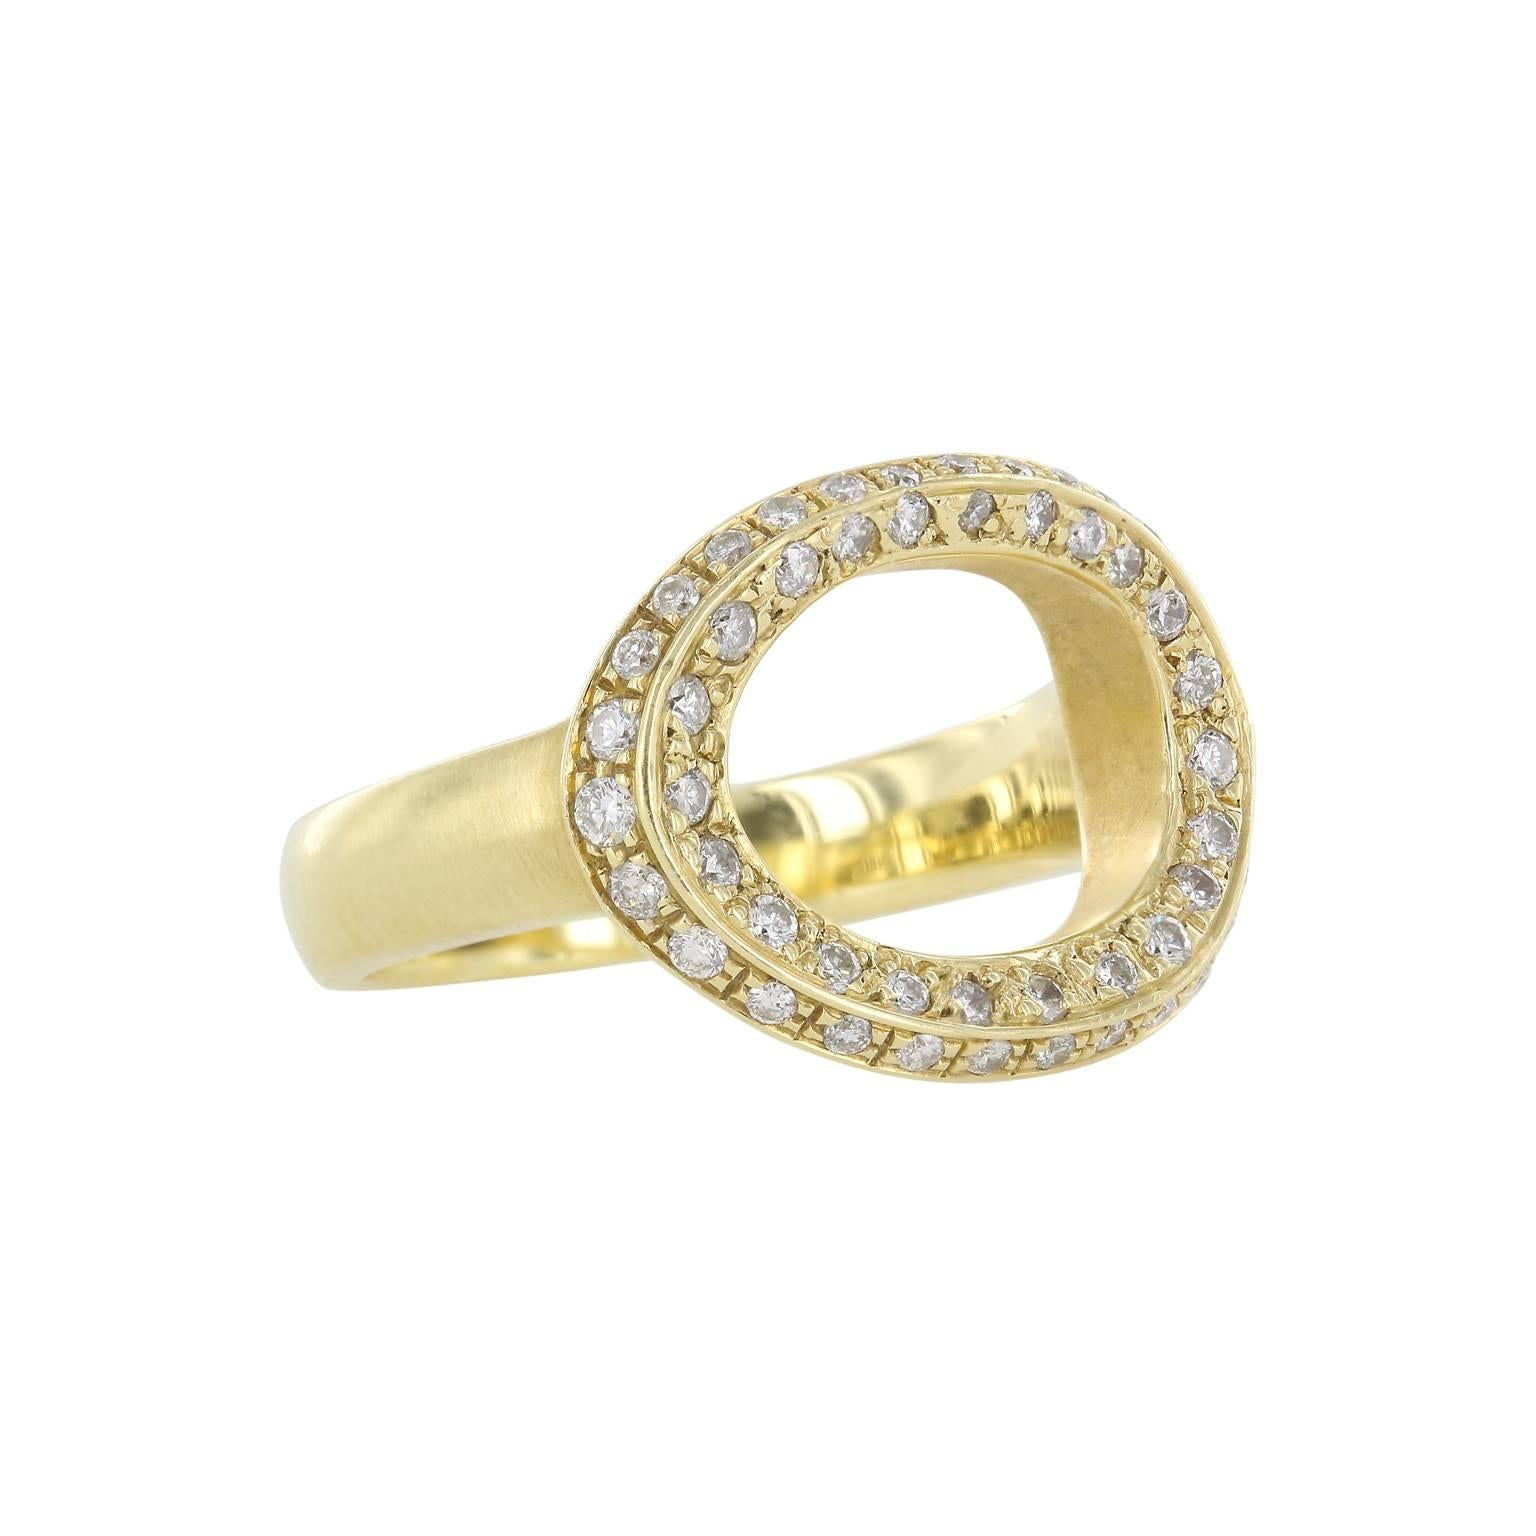 The enduring appeal of a modern geometric shape set with diamonds. The curvilinear shape of the oval is designed to fit comfortably on your finger. This modern ring is made with reclaimed 18K gold and has a total of .53 carats of diamonds. Size 7.